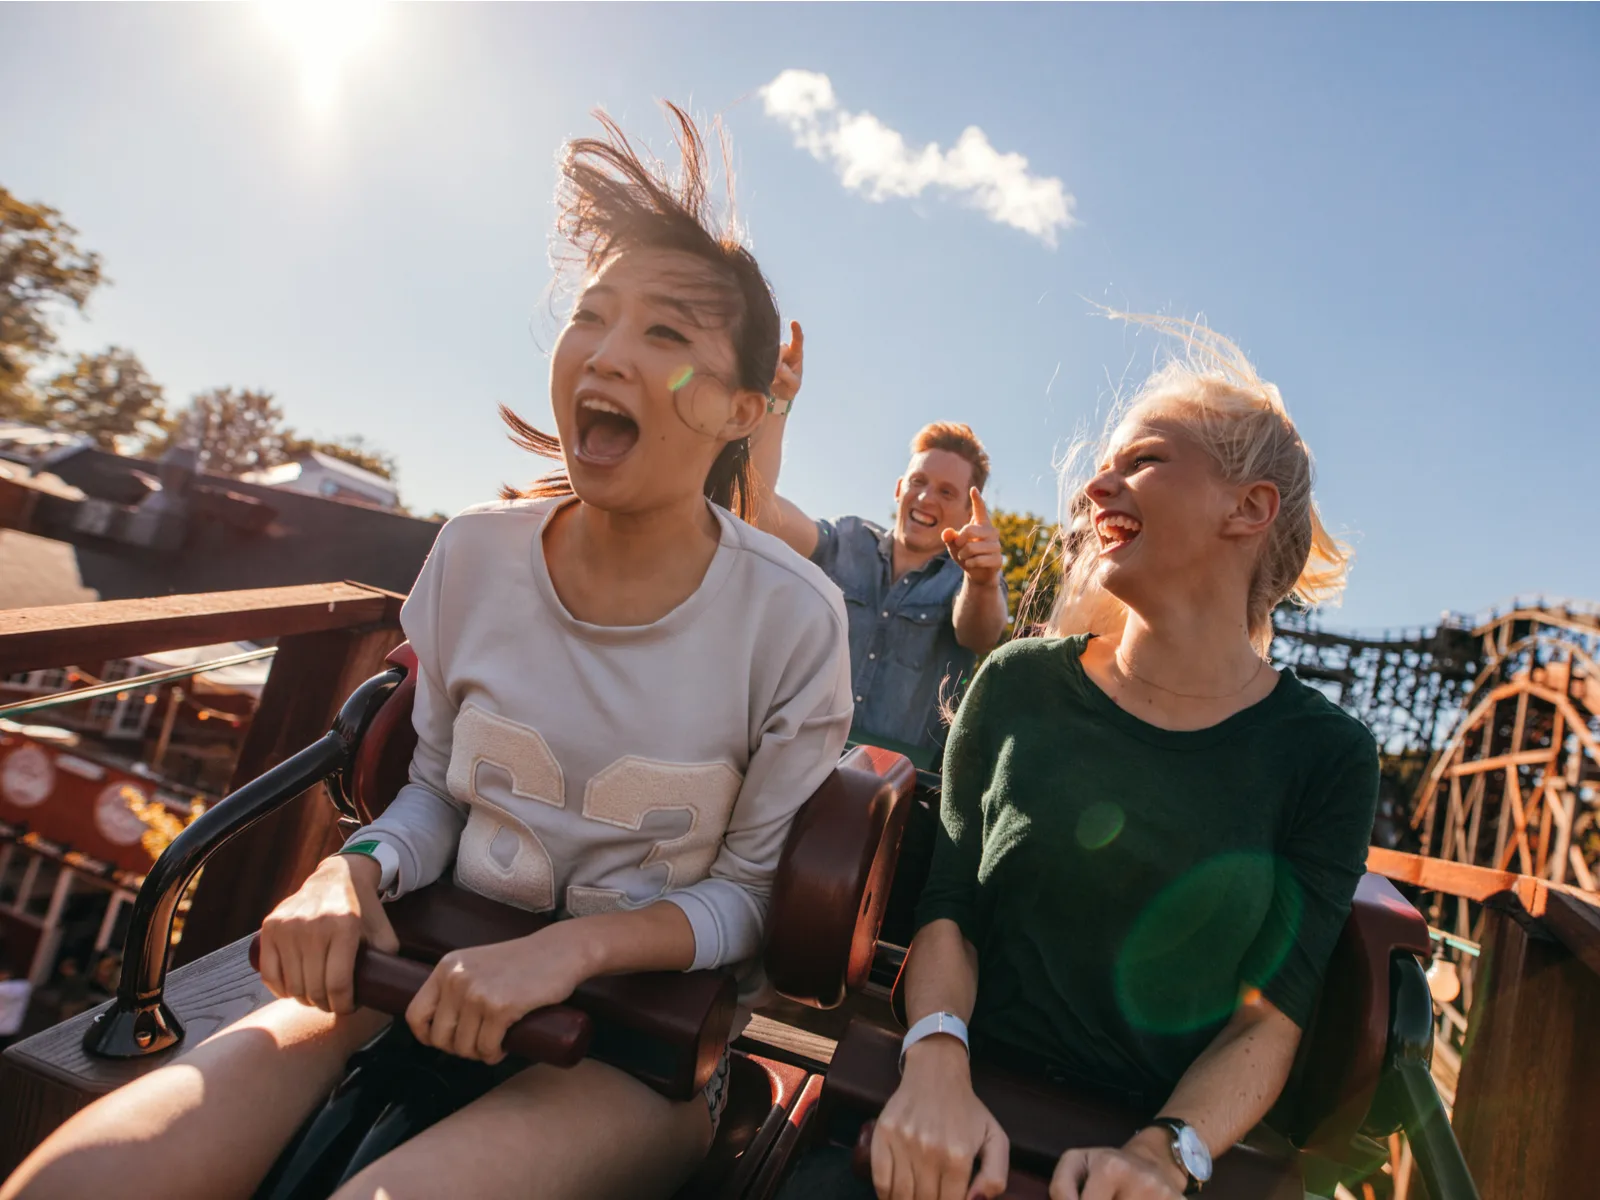 People at one of the best roller coaster parks in the United States looking excited